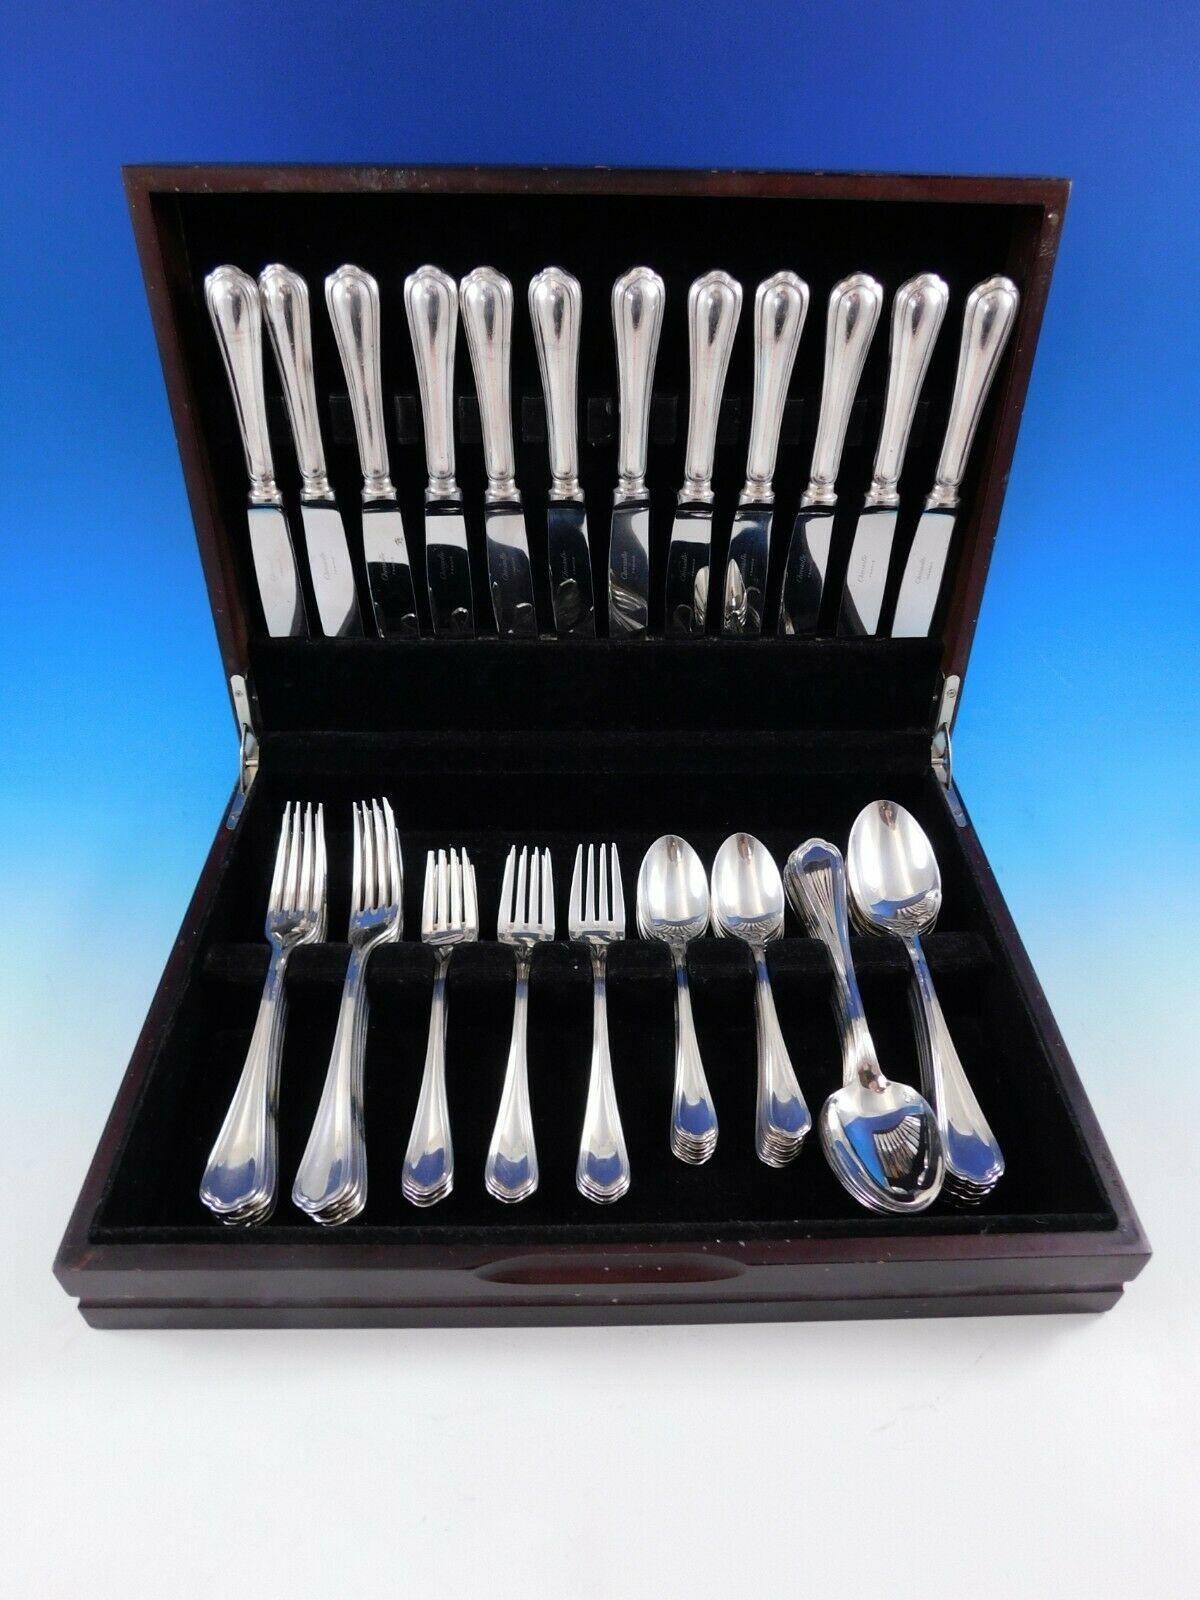 Exquisite Spatours by Christofle France silver plated flatware set, 60 pieces. This set includes:

12 knives, 9